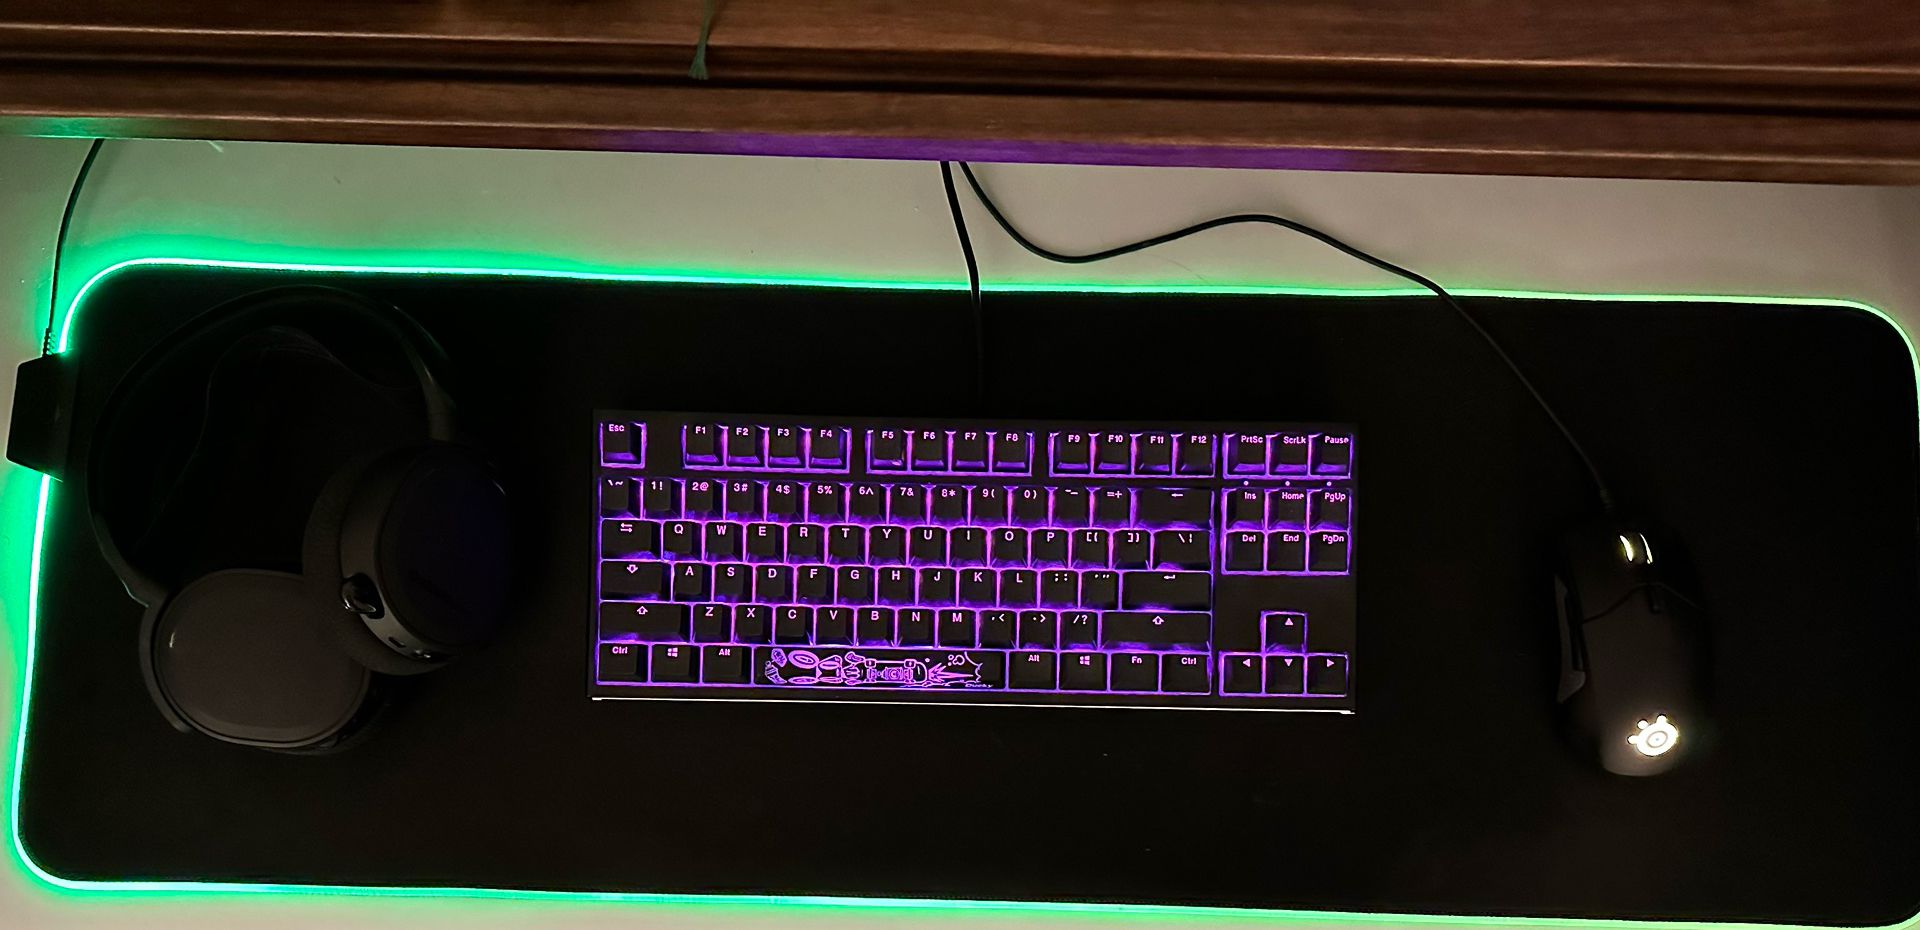 Steelseries + Ducky RGB Gaming Kit (Headset, mech Keyboard, Mouse, Pad)